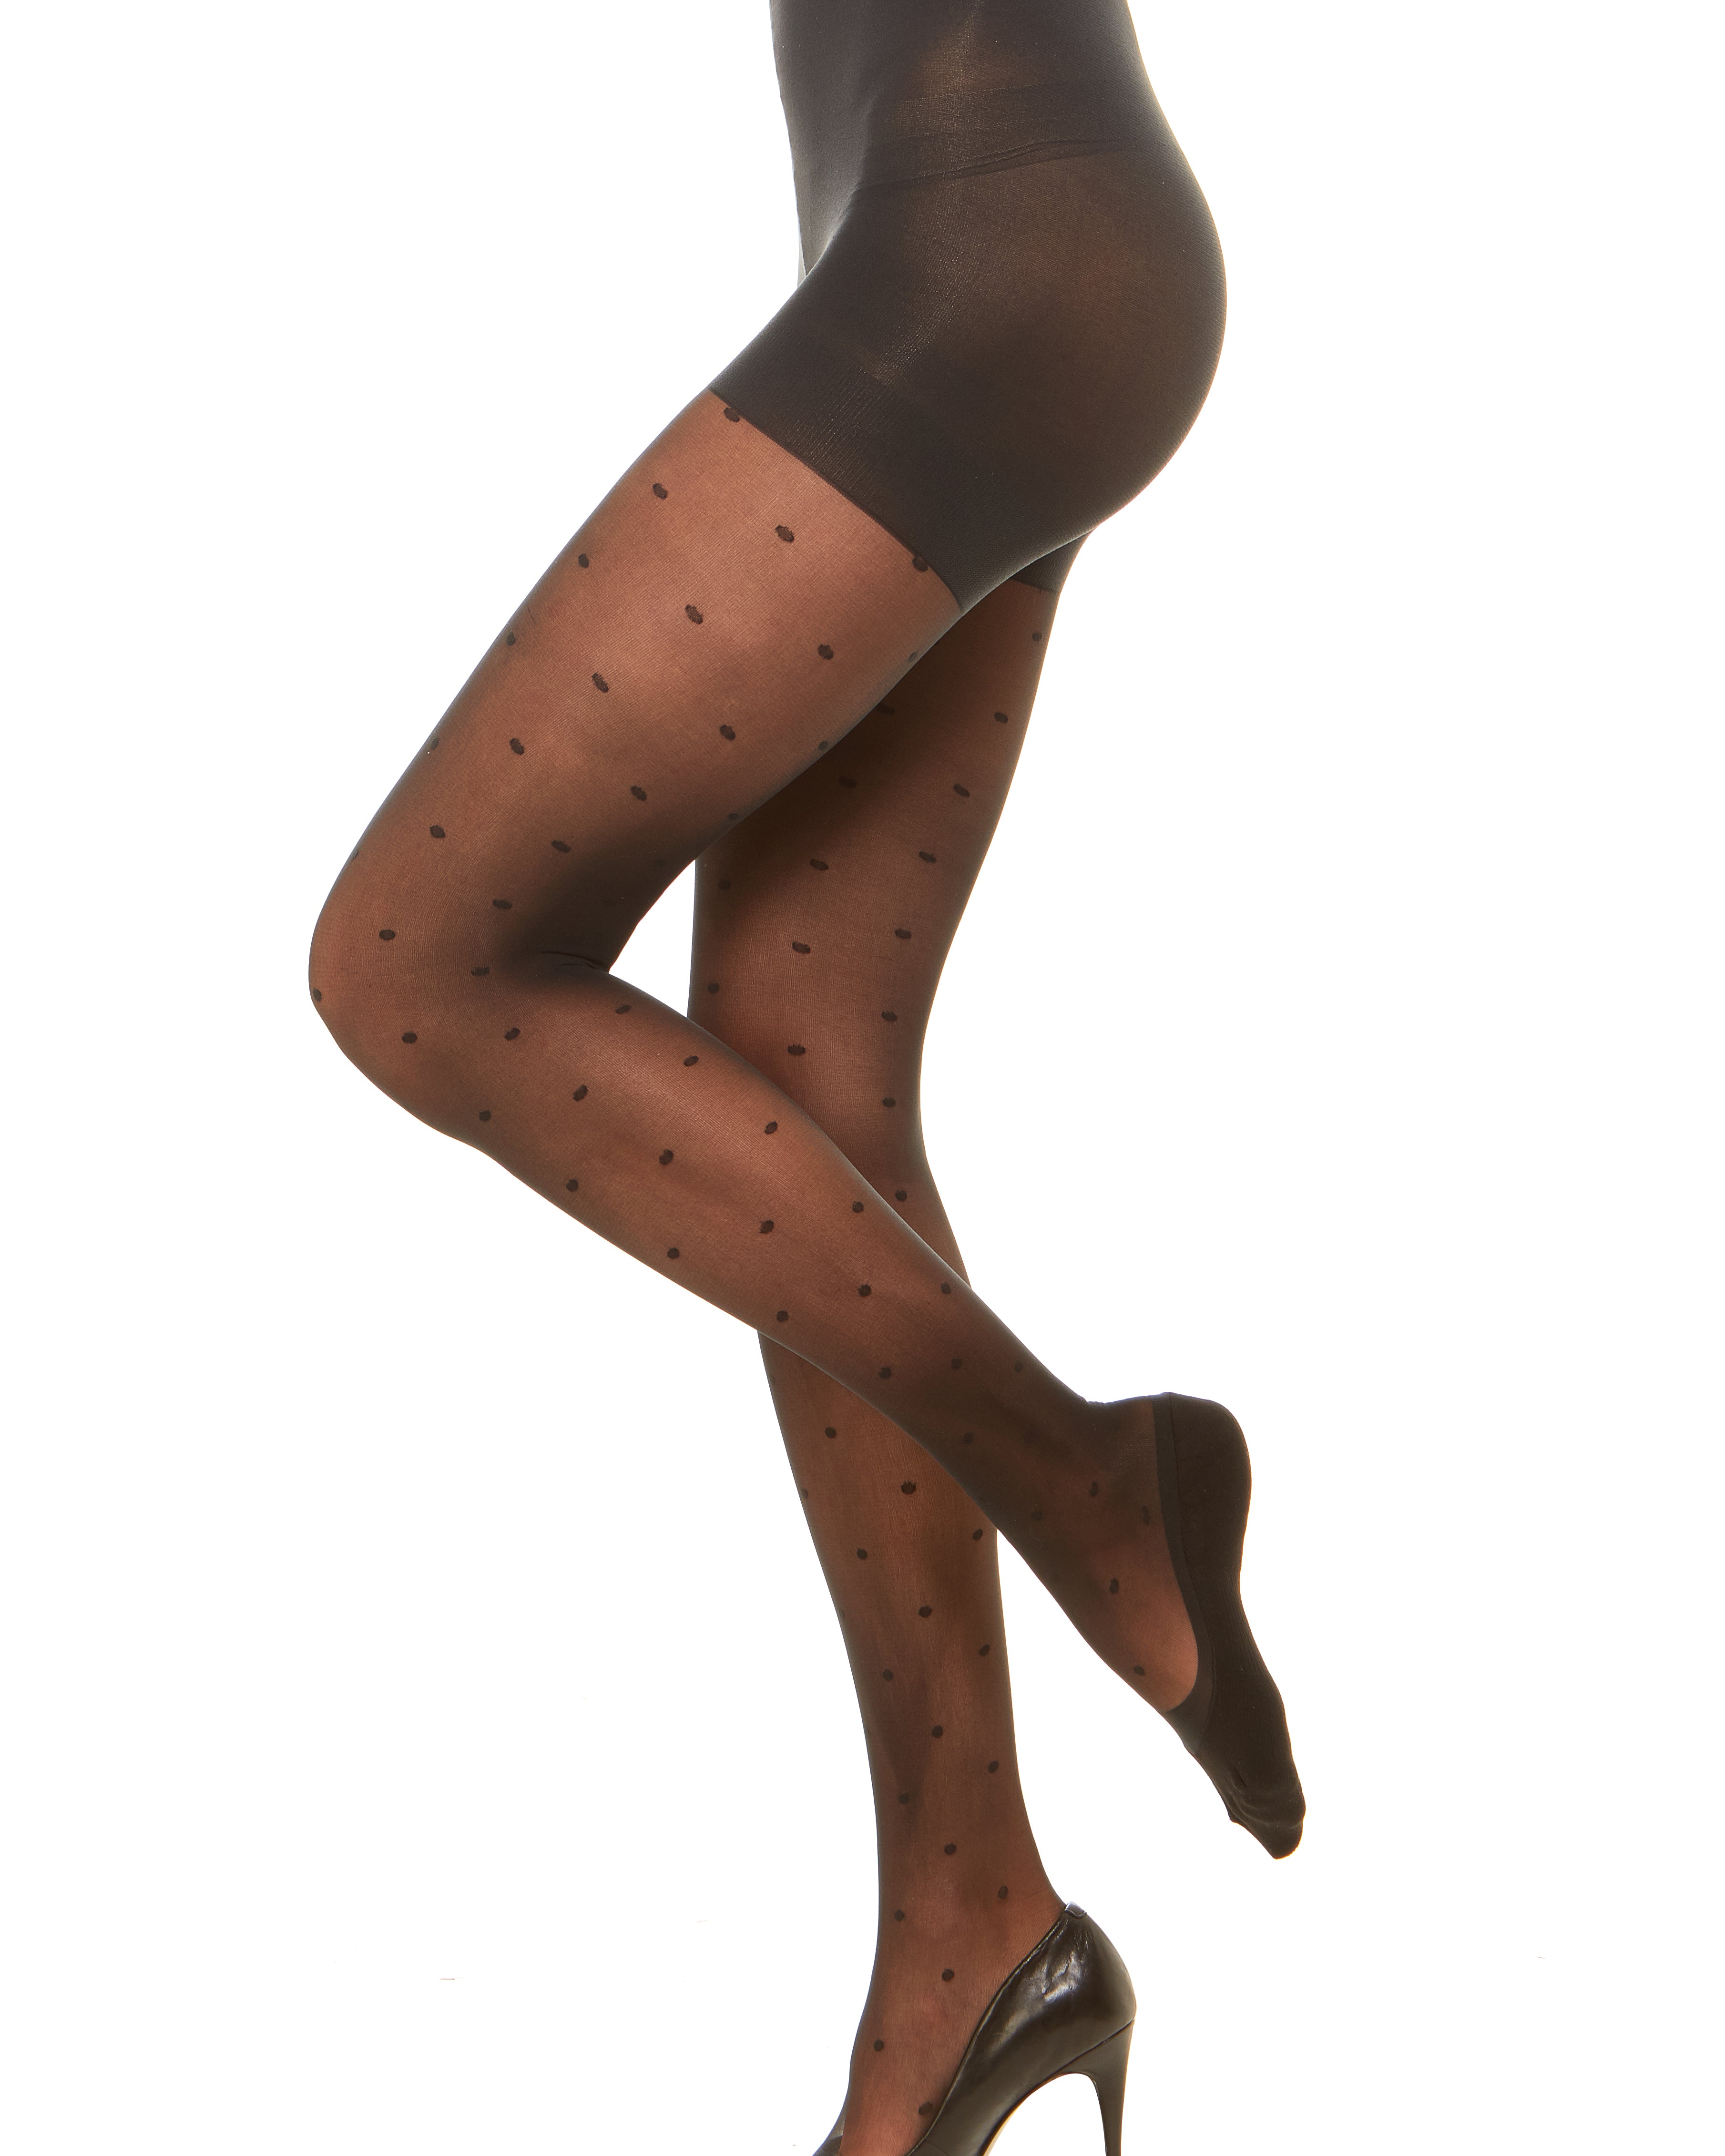 Premium sheer dot women’s tights with attached no show socks and tummy control waistband. Sock liner makes these tights easy to wear with all shoes. In a sheer  